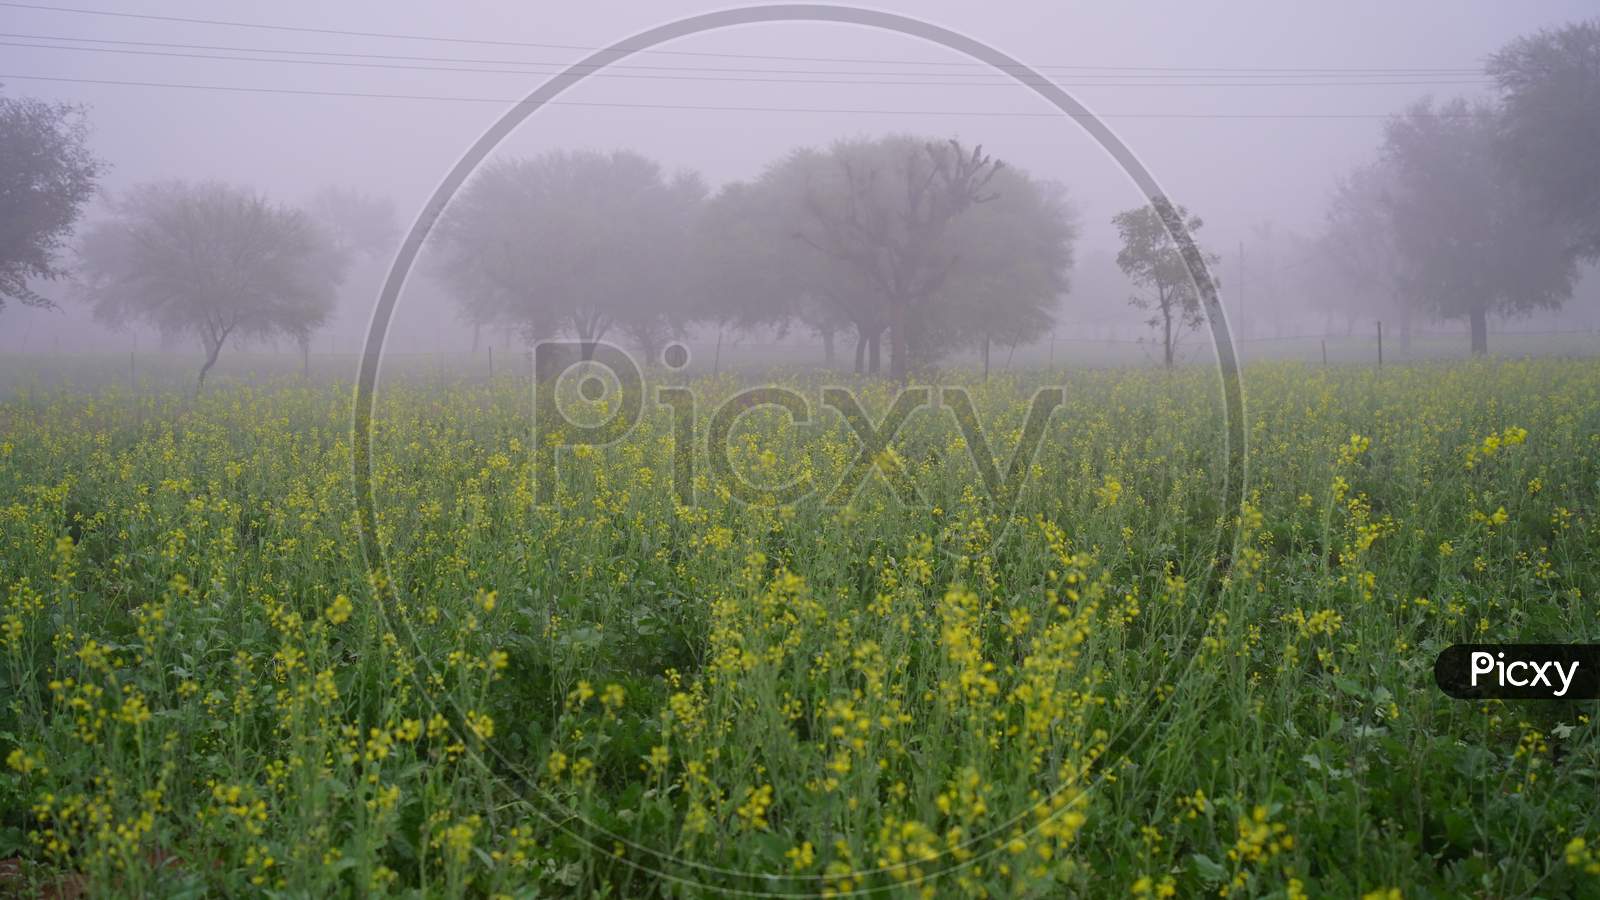 Stunning Scenery Of Mustard Fields In The Morning Mist, Blooming Yellow Mustard Flowers In A Garden. Yellow Dormant Plant Shivering By Mist Droplets.